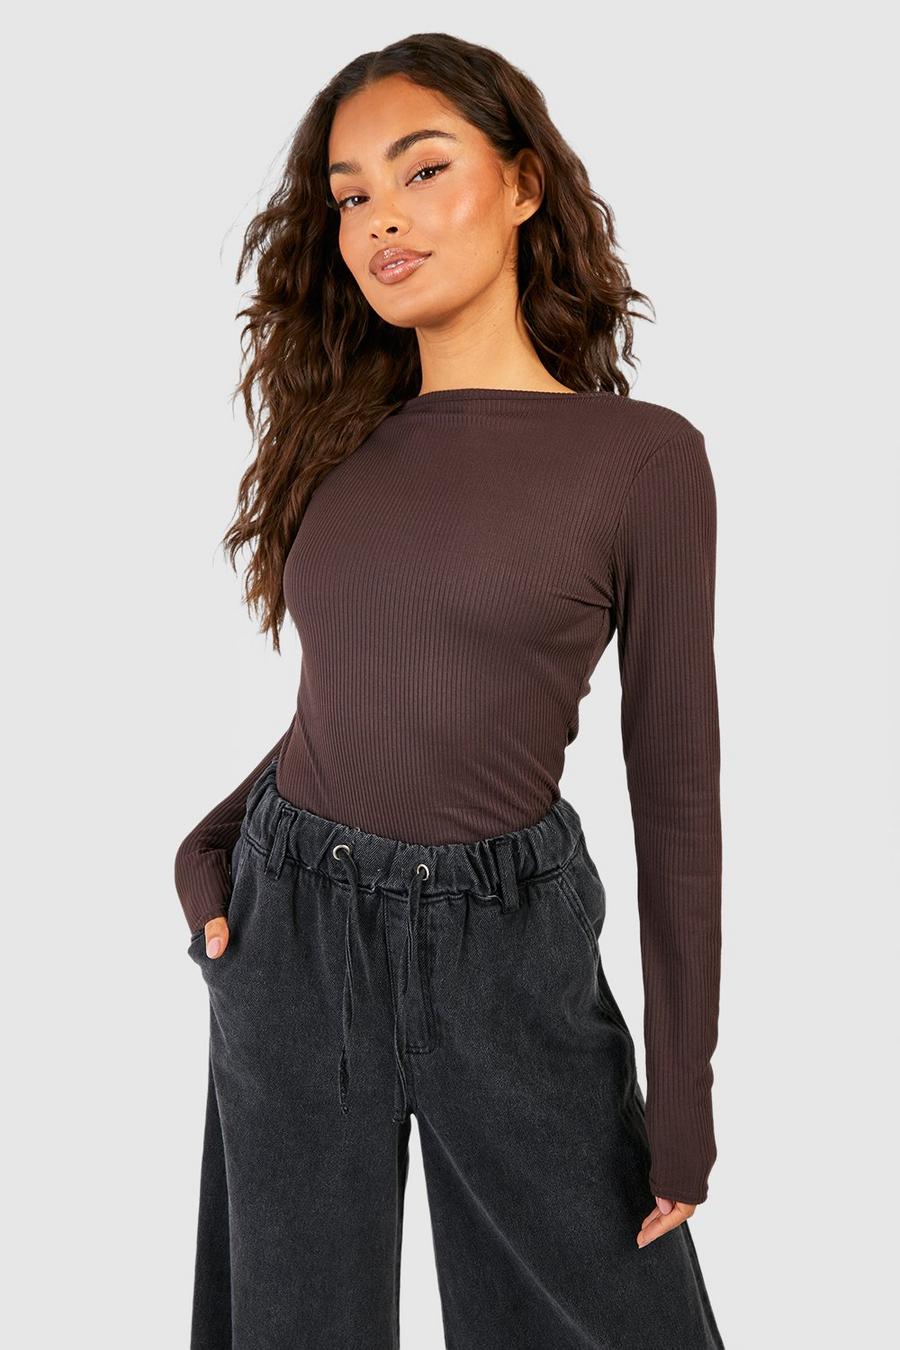 Chocolate Boat Neck Long Sleeve Top